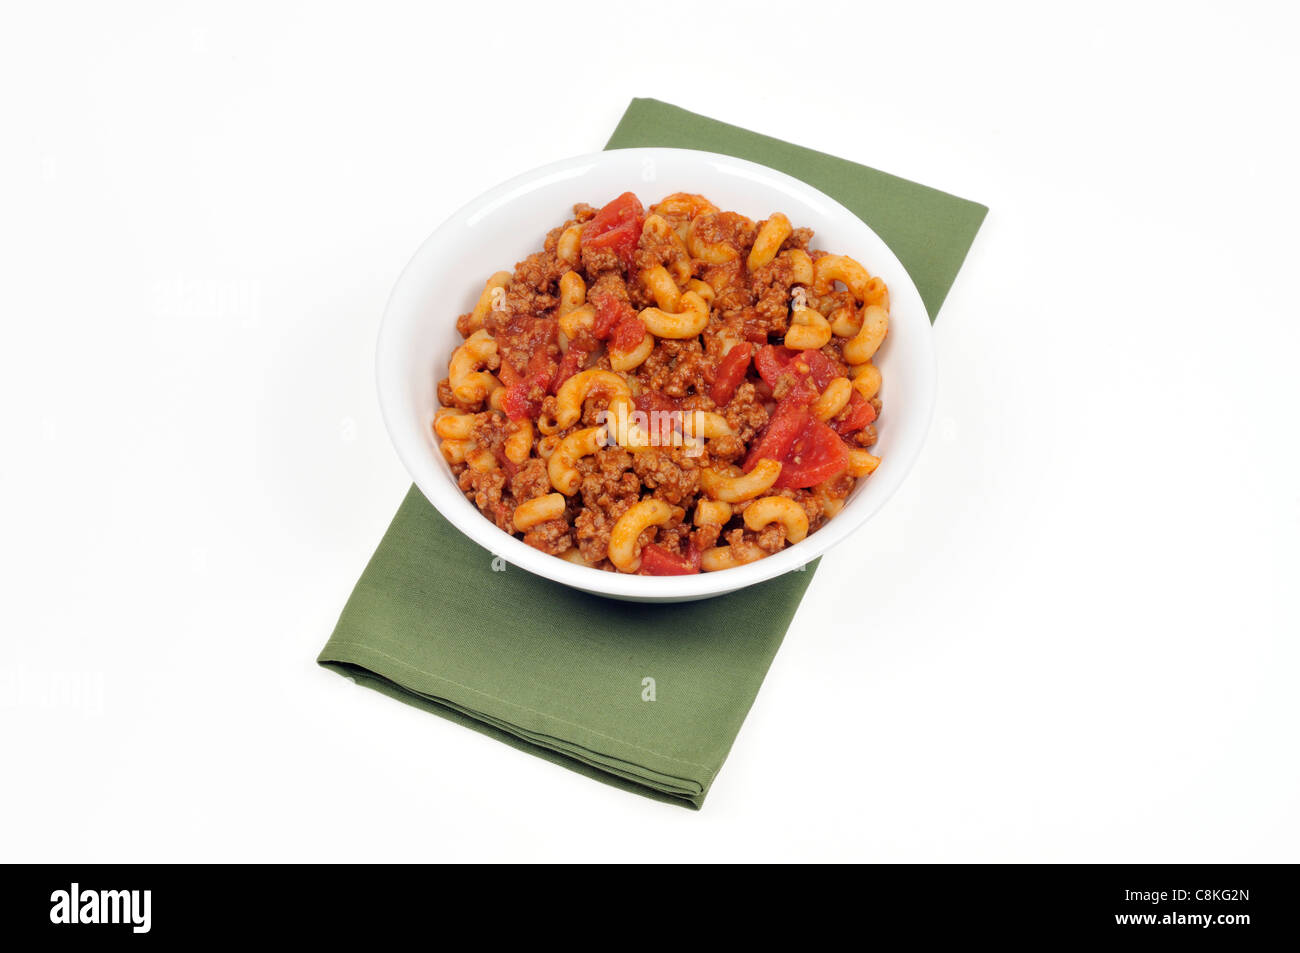 Bowl of macaroni and beef with tomato sauce on white background cutout. Stock Photo